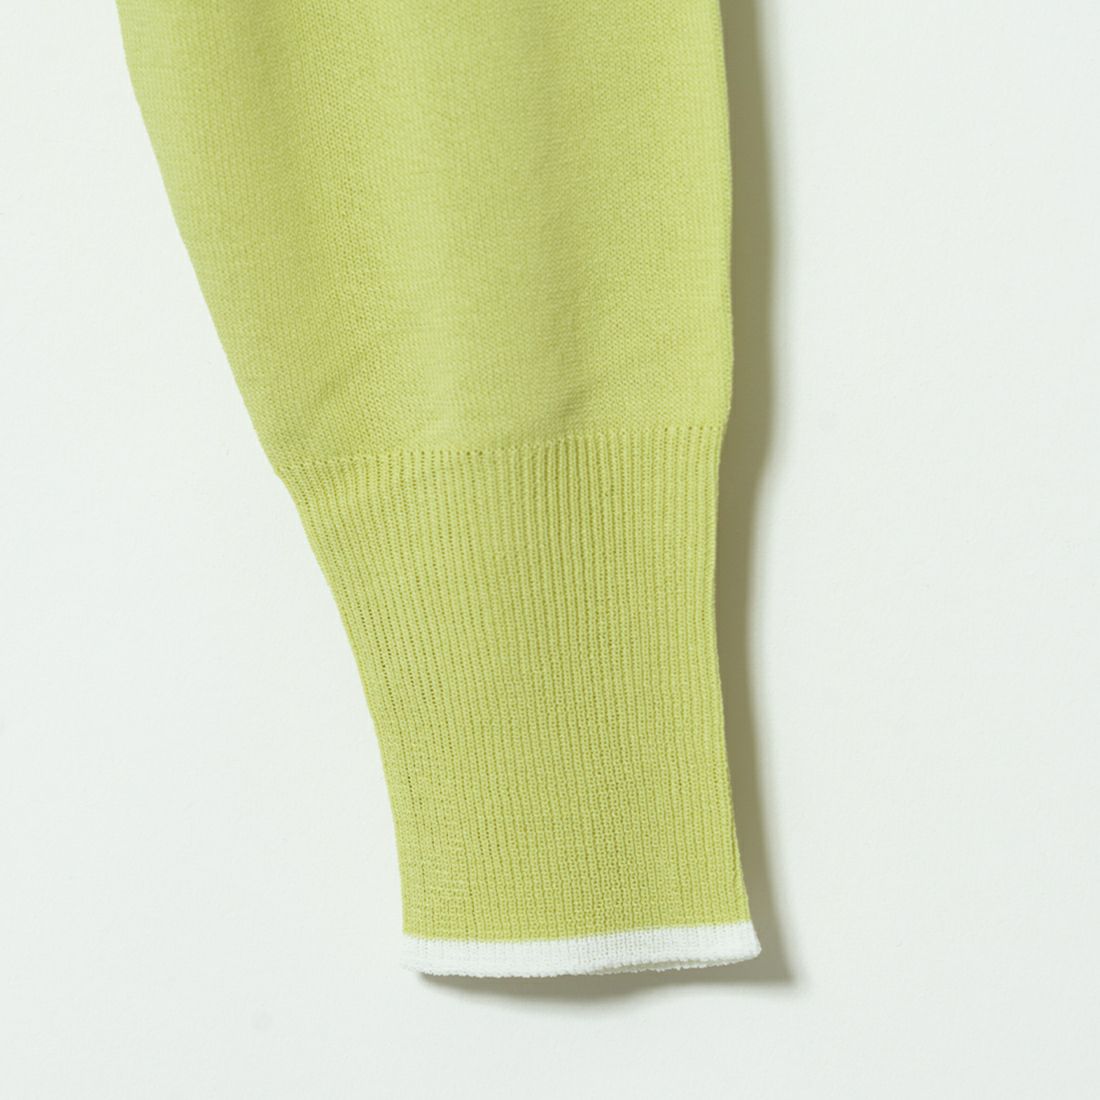 Jeans Factory Clothes [ジーンズファクトリークローズ] 配色ニットカーディガン [116-5024] LIME/OFF